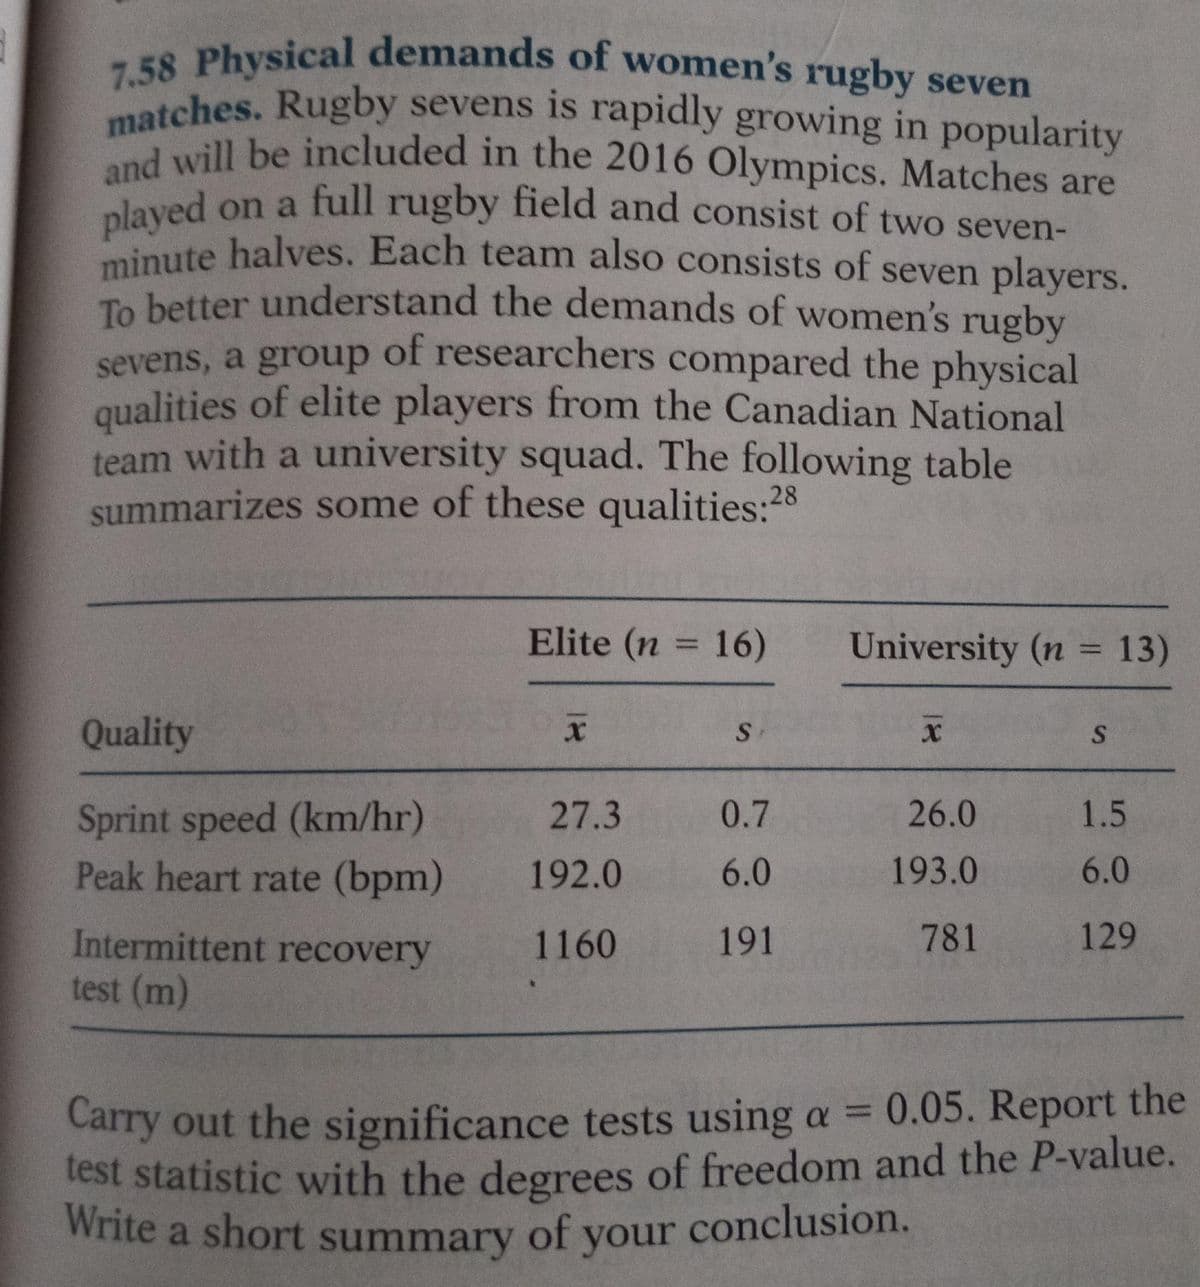 7.58 Physical demands of women's rugby seven
matches. Rugby sevens is rapidly growing in popularity
and will be included in the 2016 Olympics. Matches are
on a full rugby field and consist of two seven-
played
minute halves. Each team also consists of seven players.
To better understand the demands of women's rugby
sevens, a group of researchers compared the physical
qualities of elite players from the Canadian National
team with a university squad. The following table
summarizes some of these qualities:28
Quality
Sprint speed (km/hr)
Peak heart rate (bpm)
Intermittent recovery
test (m)
Elite (n = 16)
X
27.3
192.0
1160
S
0.7
6.0
191
University (n = 13)
X
26.0
193.0
781
S
1.5
6.0
129
Carry out the significance tests using a = 0.05. Report the
test statistic with the degrees of freedom and the P-value.
Write a short summary of your conclusion.